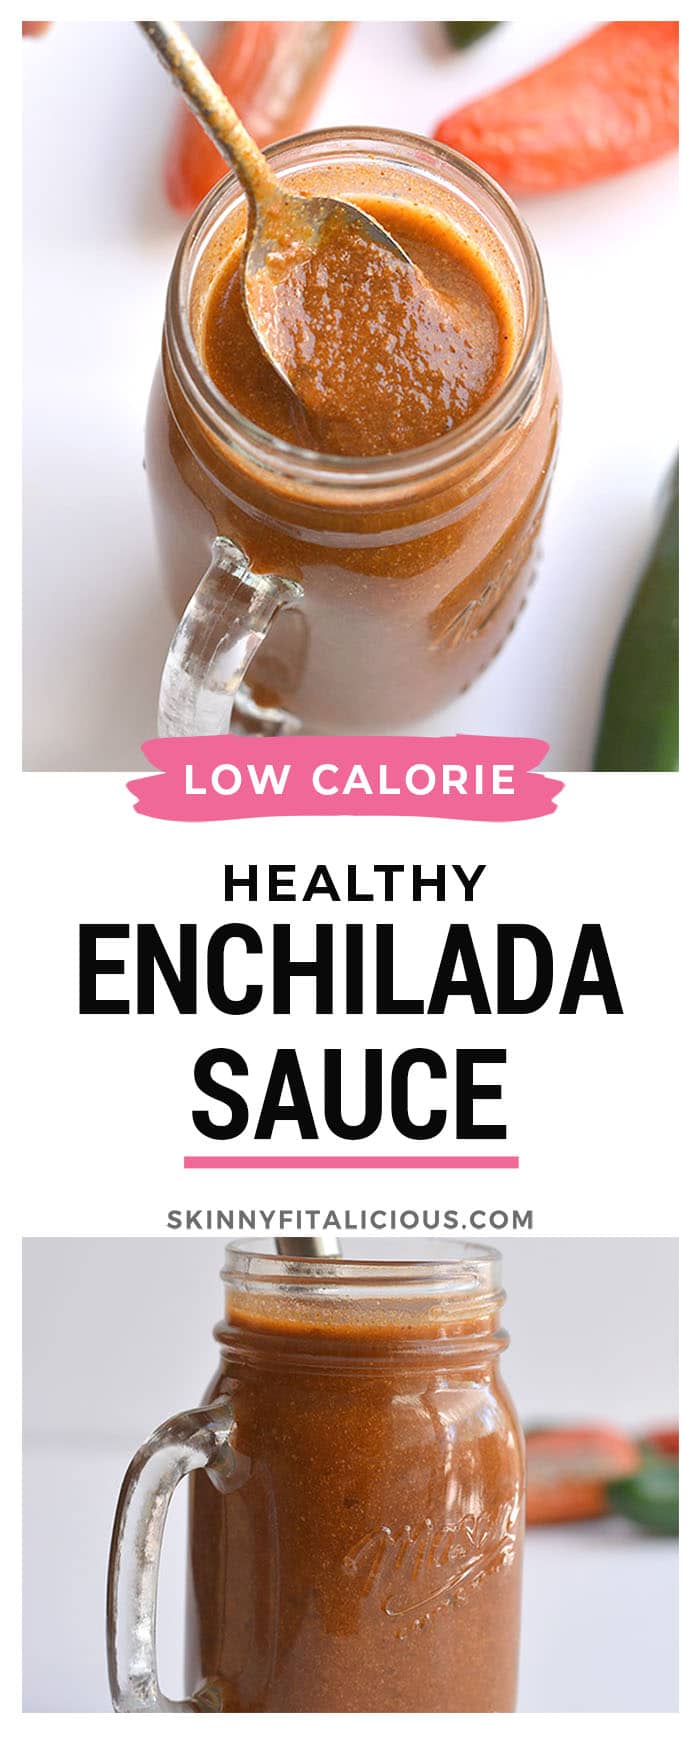 This Healthy Enchilada Sauce is made with homemade with wholesome, everyday ingredients. A simple to make, 10 minute enchilada sauce made easy on the stovetop with minimal work. Naturally gluten free, Paleo, Vegan and low in calories. Perfect for topping enchiladas, tacos, burritos, salads and more!